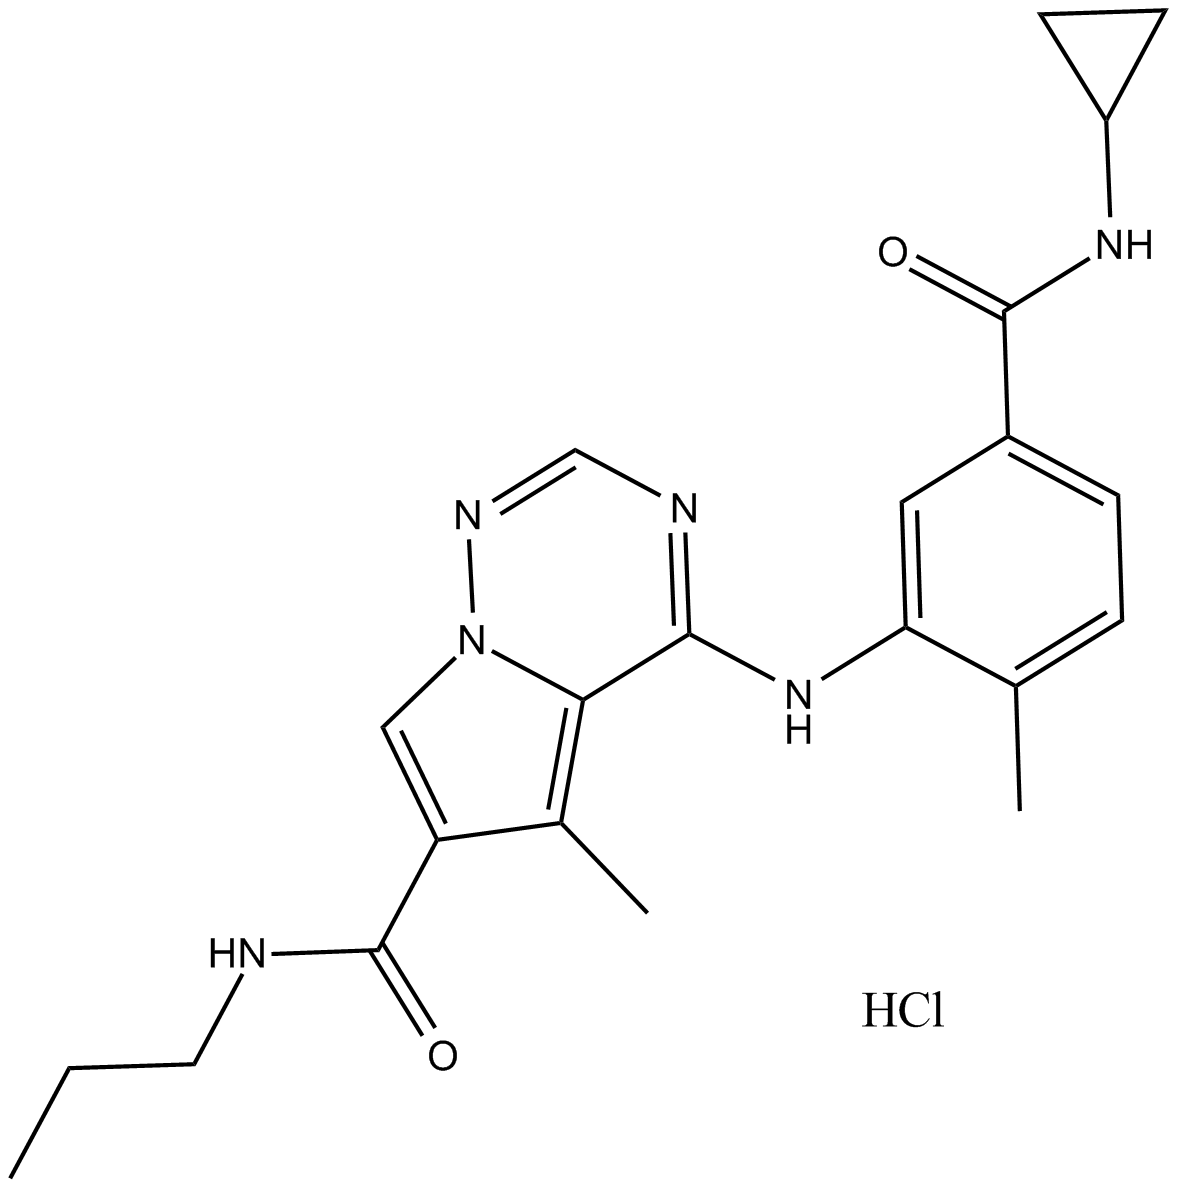 BMS-582949 hydrochloride  Chemical Structure